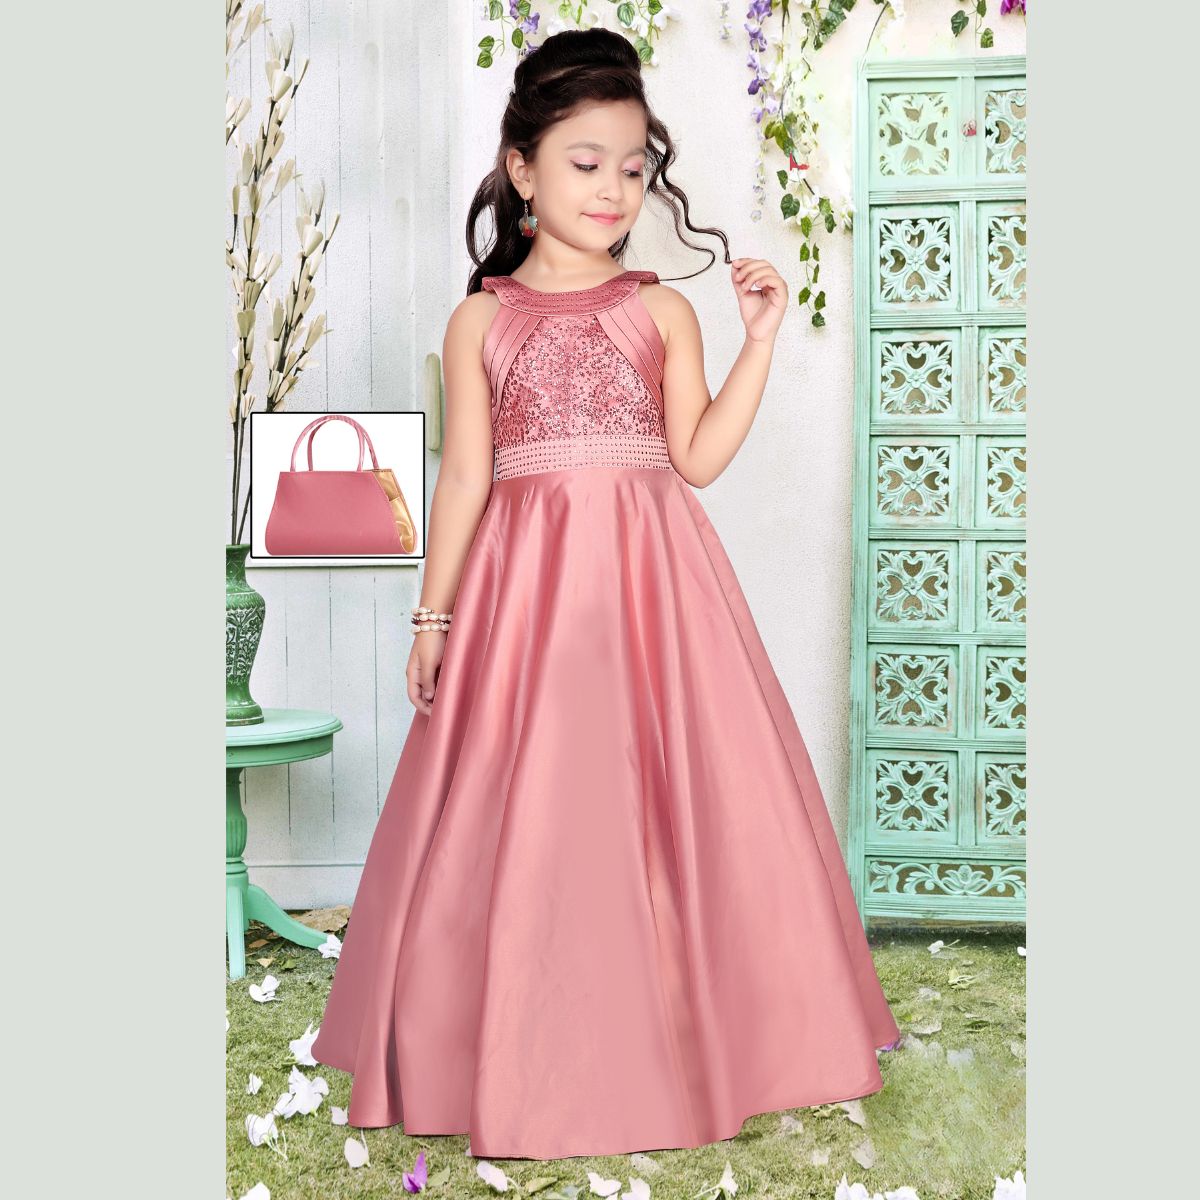 2022 European And American New Dress For Middle And Small Girls Lovely Bow  Show Skirt Parti Elbiseleri YT033